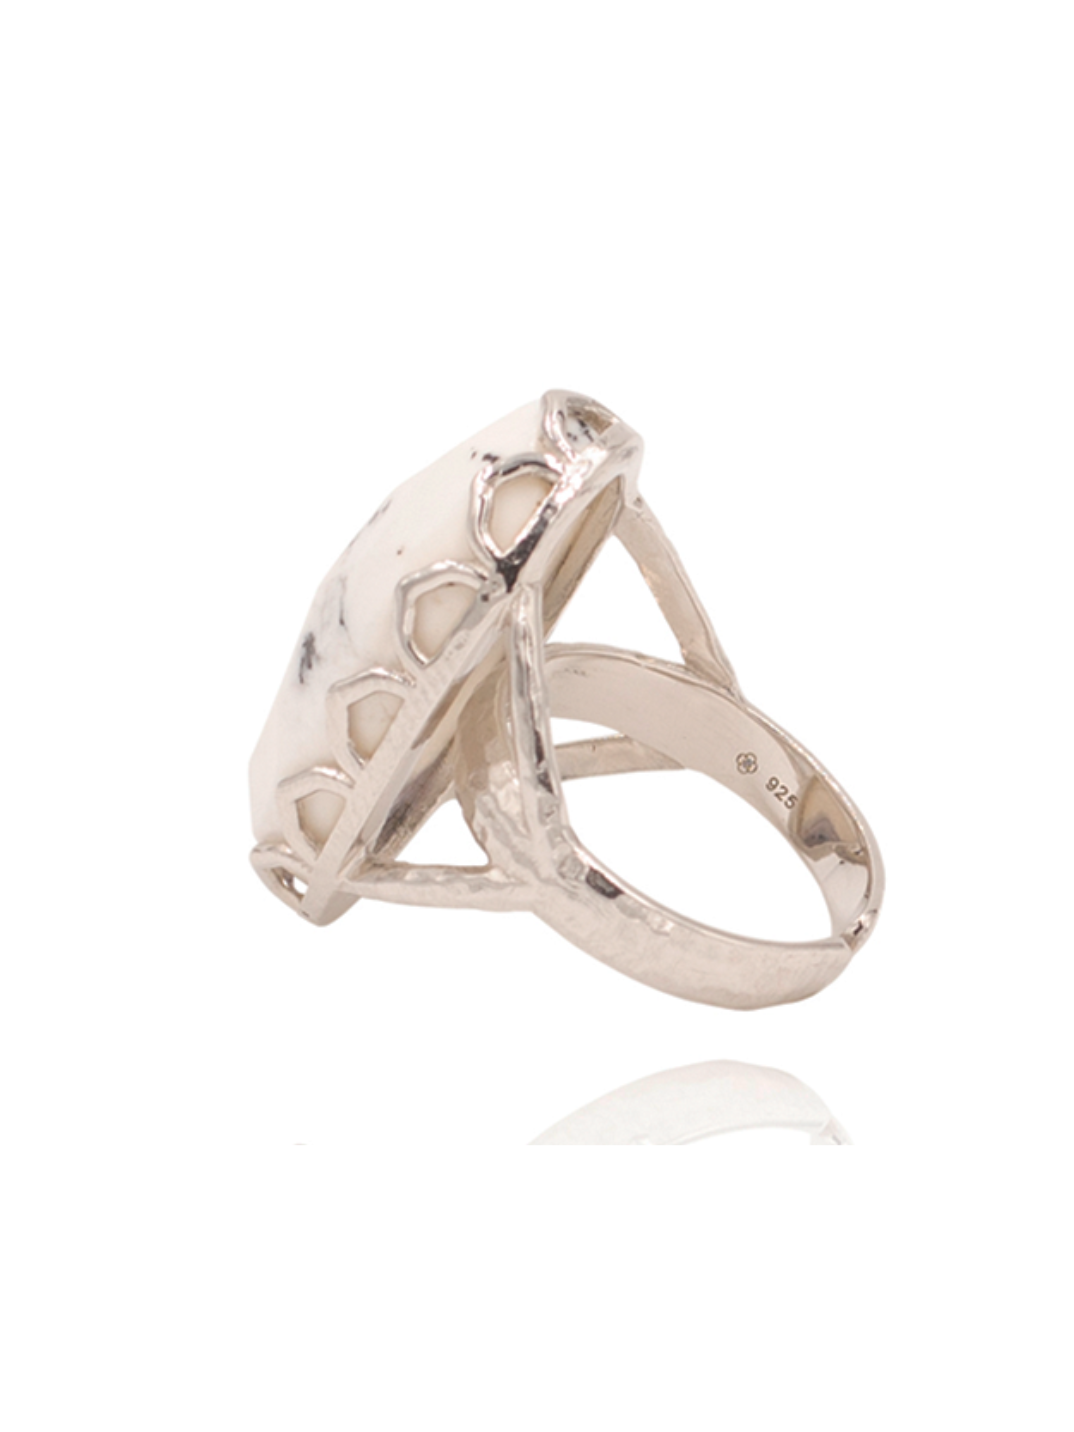 You will fall in love with our Dendritic cocktail ring! This semi precious stone has natural grey and black fern like patterns, each one distinctive to you. Ethical jewelry sustainable brand